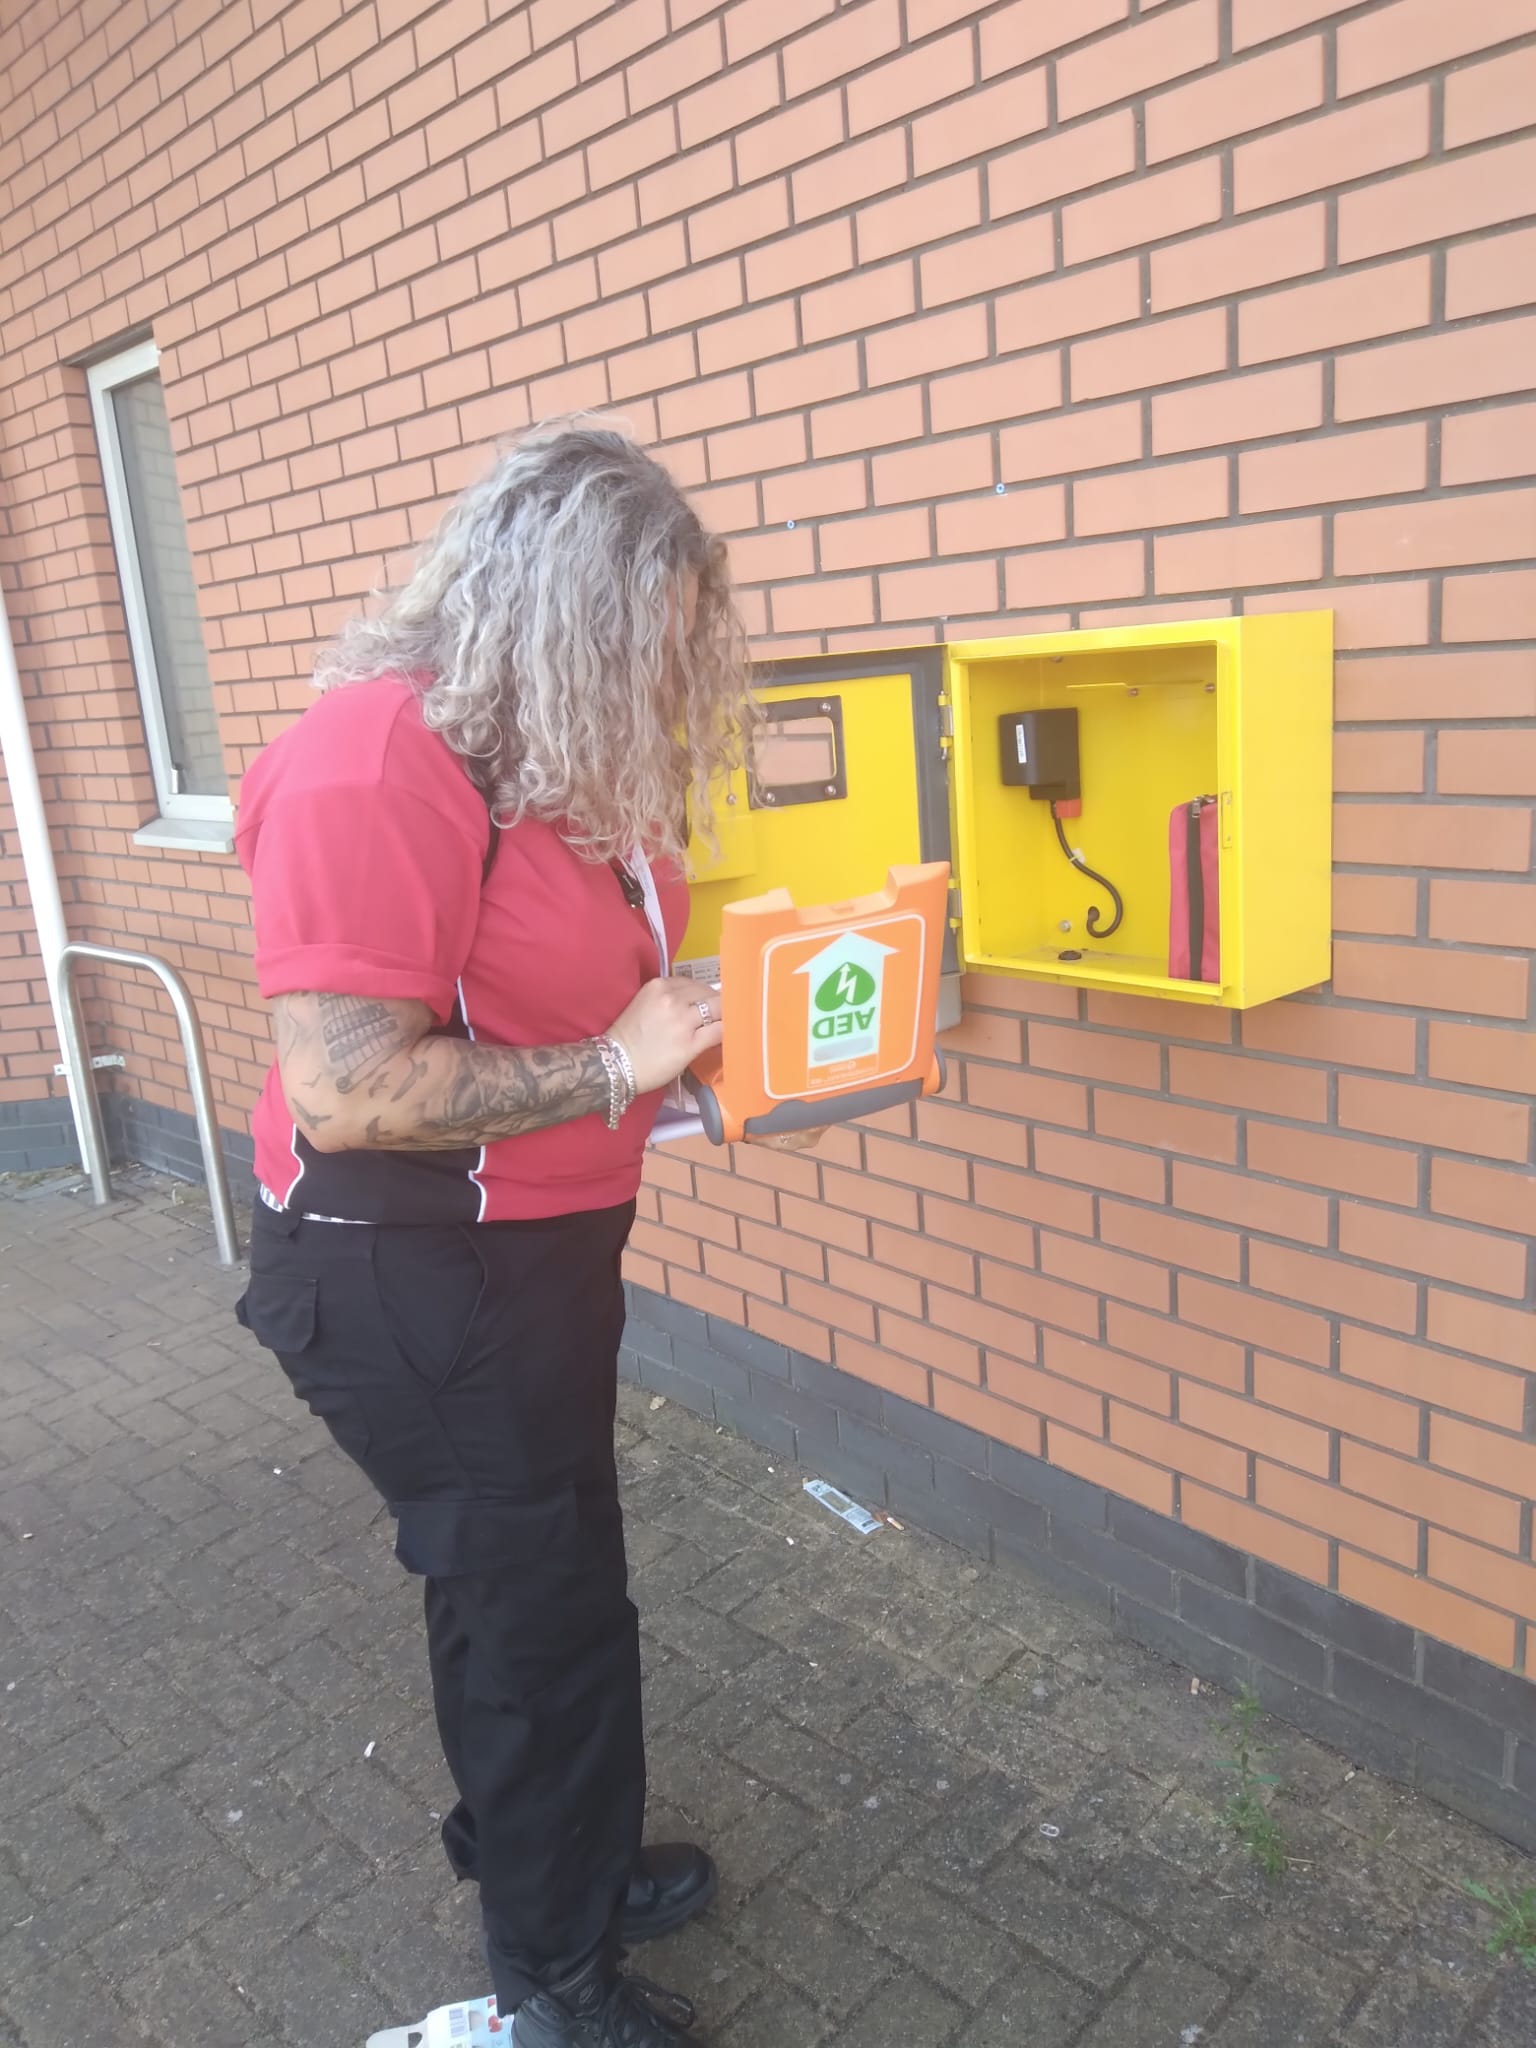 West Bromwich BID doing our checks on defibrillator pack